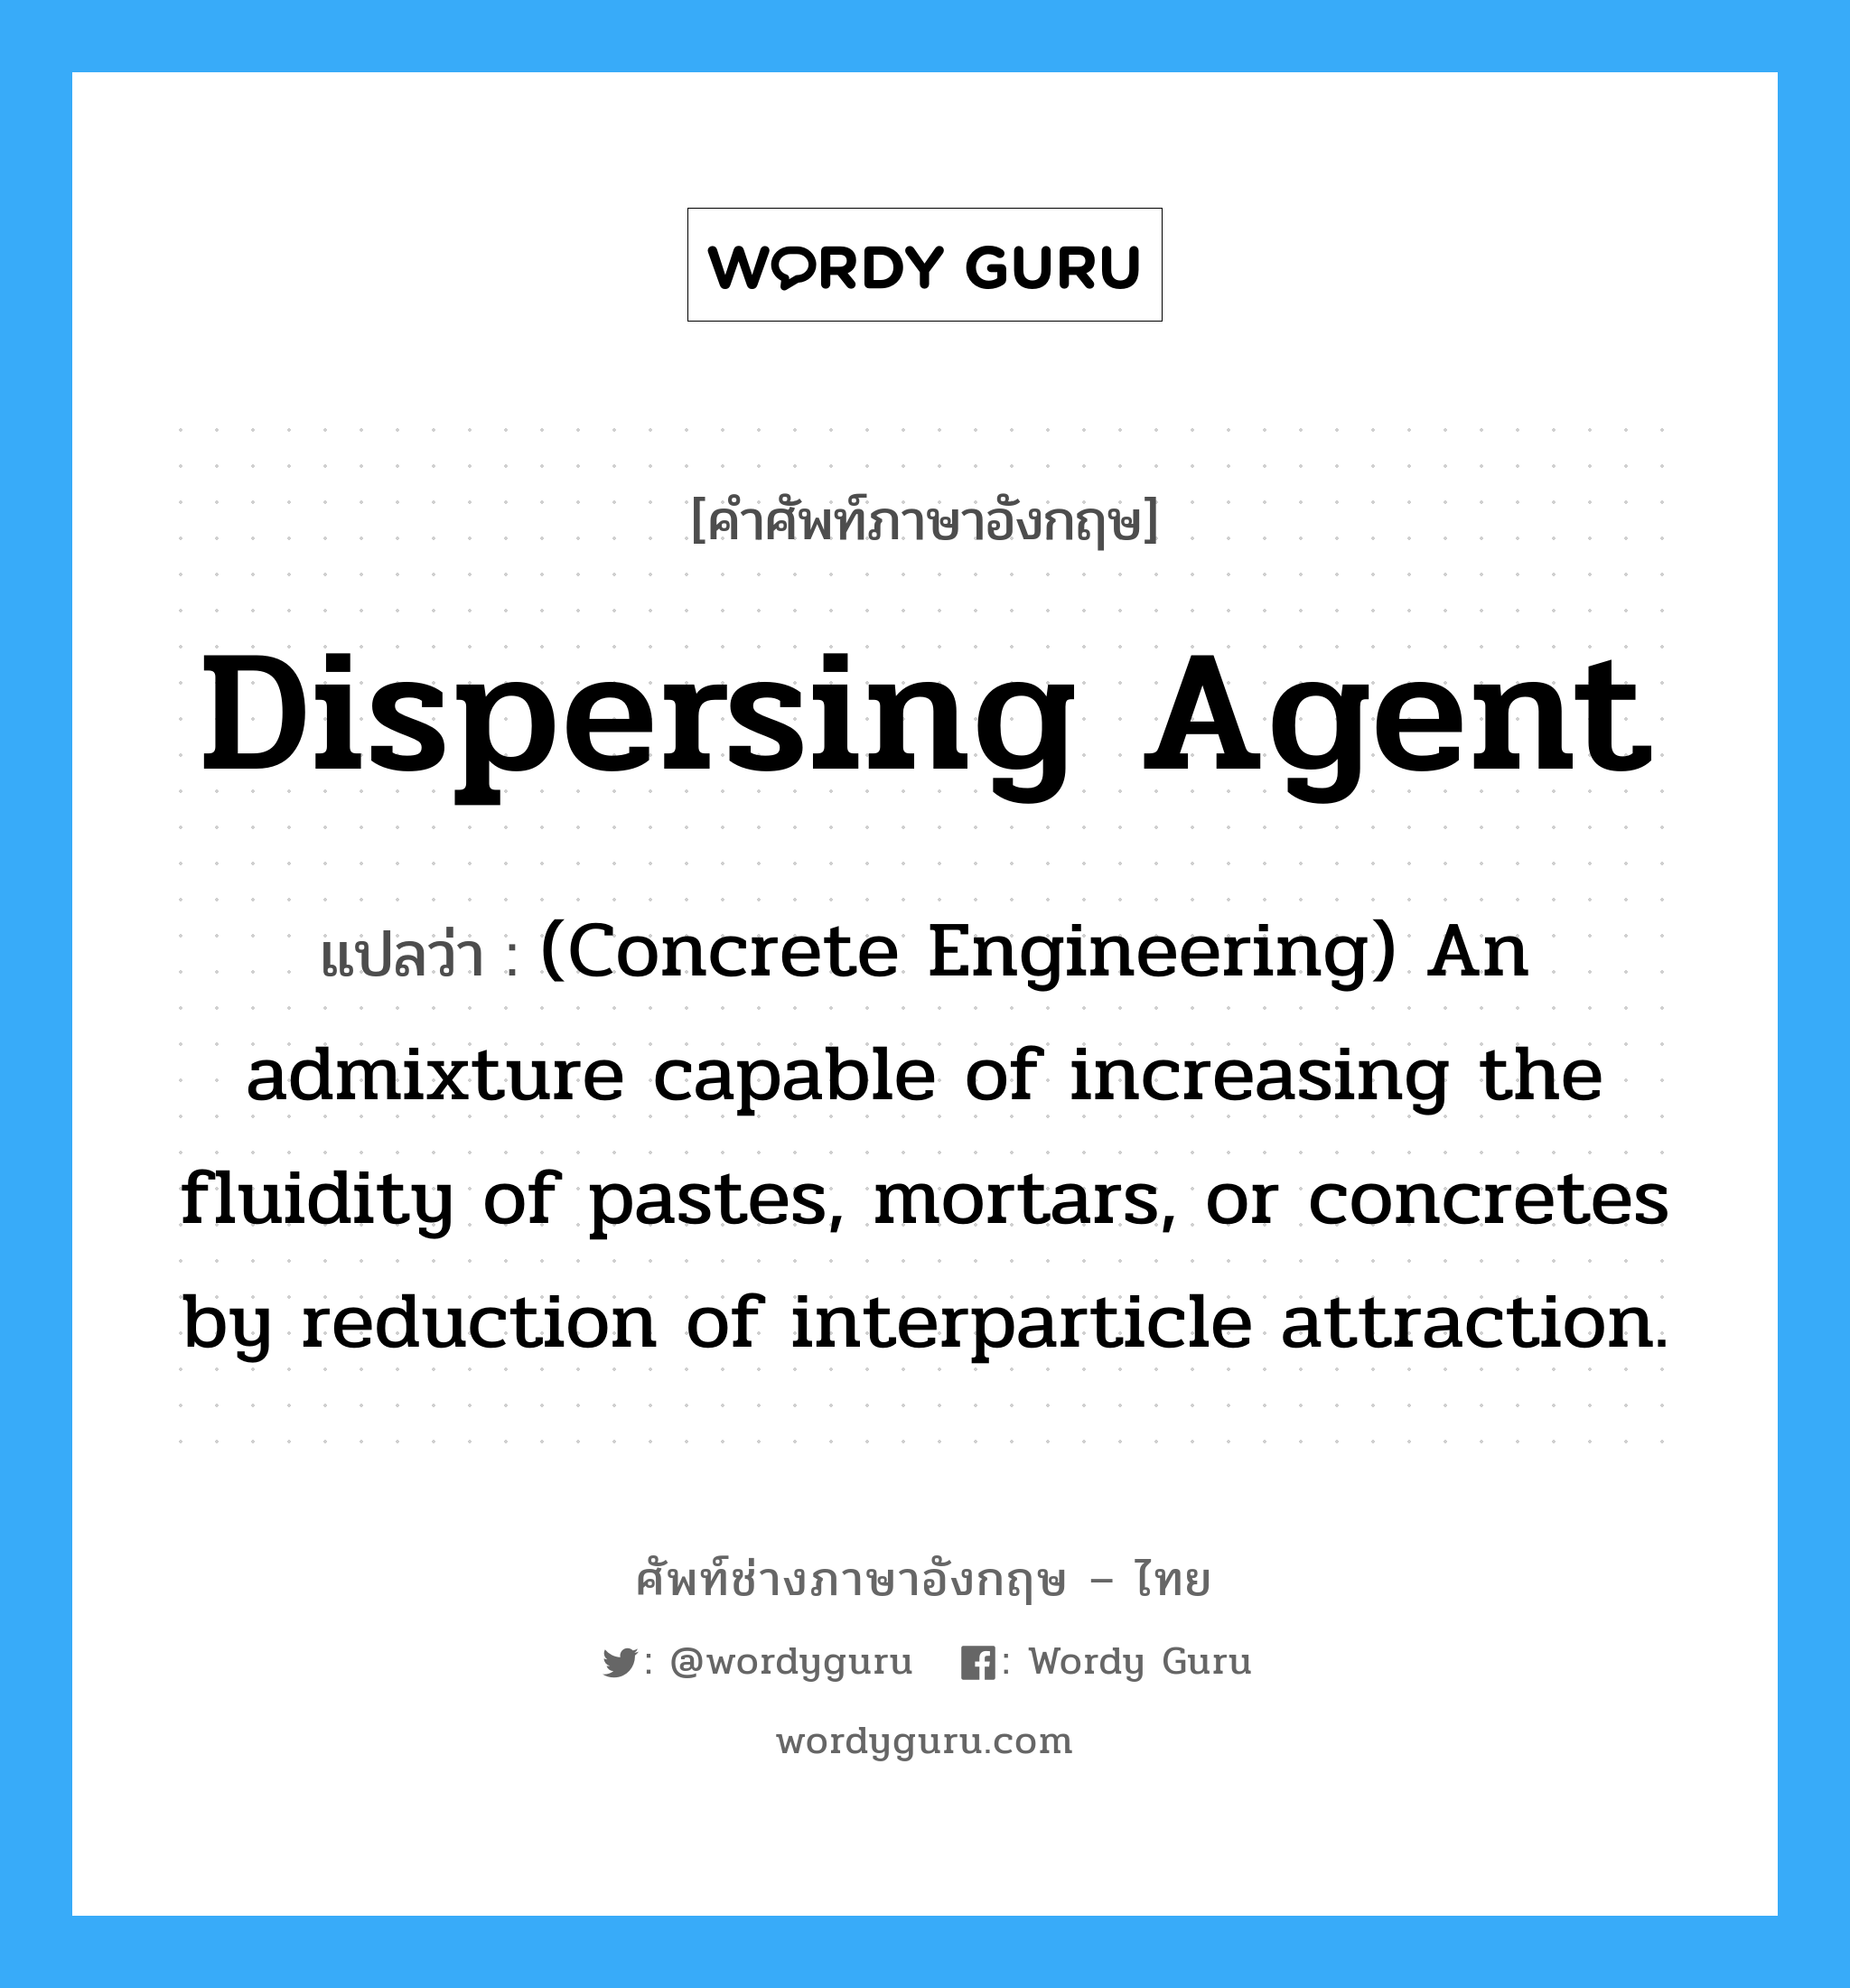 Dispersing Agent แปลว่า?, คำศัพท์ช่างภาษาอังกฤษ - ไทย Dispersing Agent คำศัพท์ภาษาอังกฤษ Dispersing Agent แปลว่า (Concrete Engineering) An admixture capable of increasing the fluidity of pastes, mortars, or concretes by reduction of interparticle attraction.